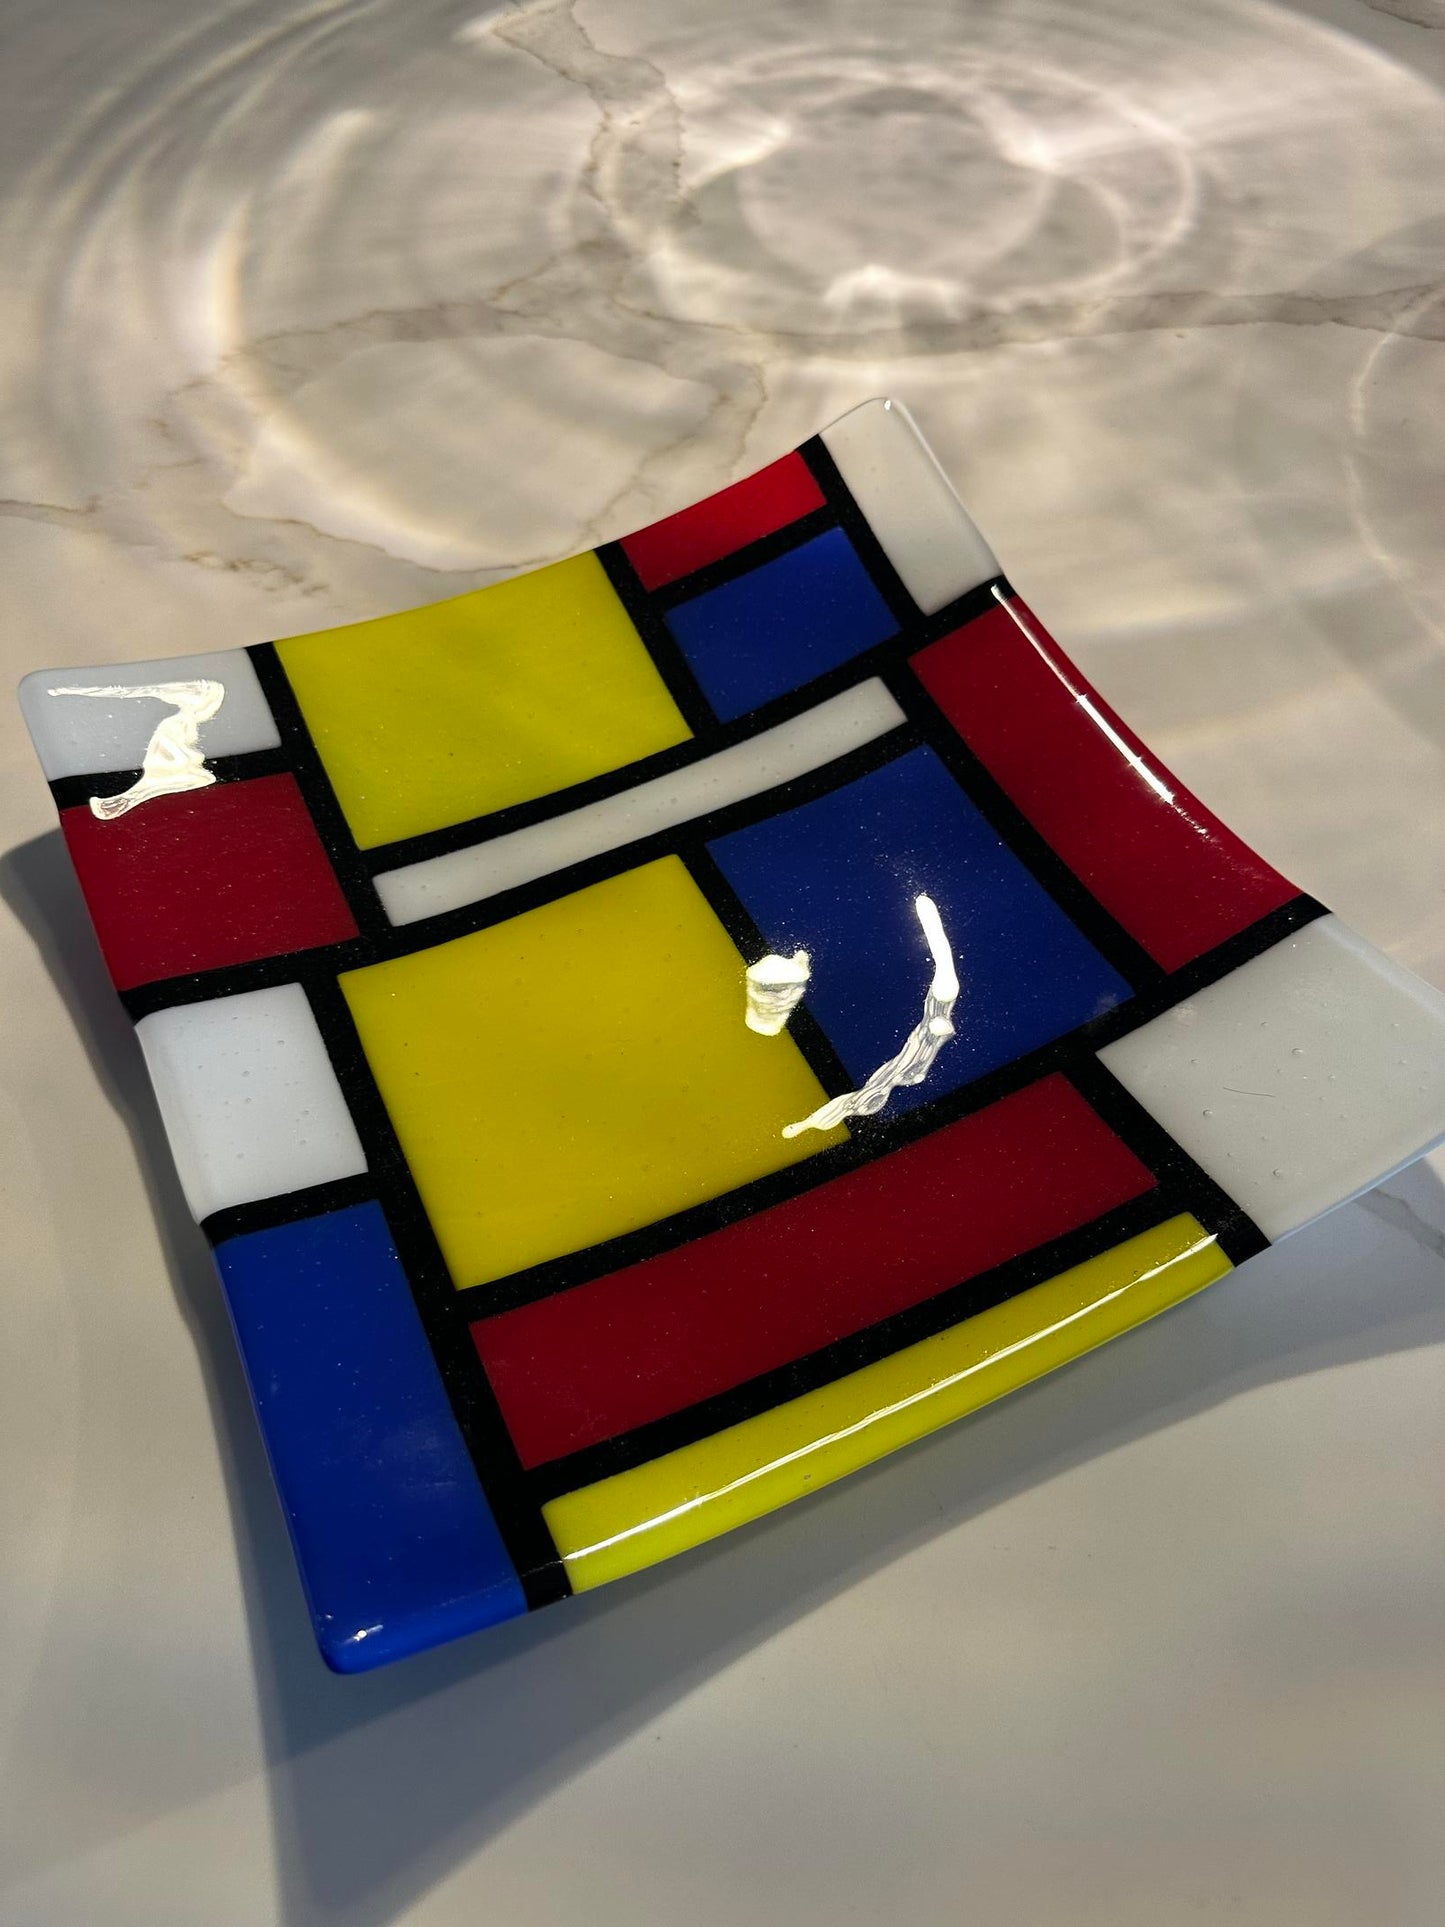 A little bit of Mondrian in your life